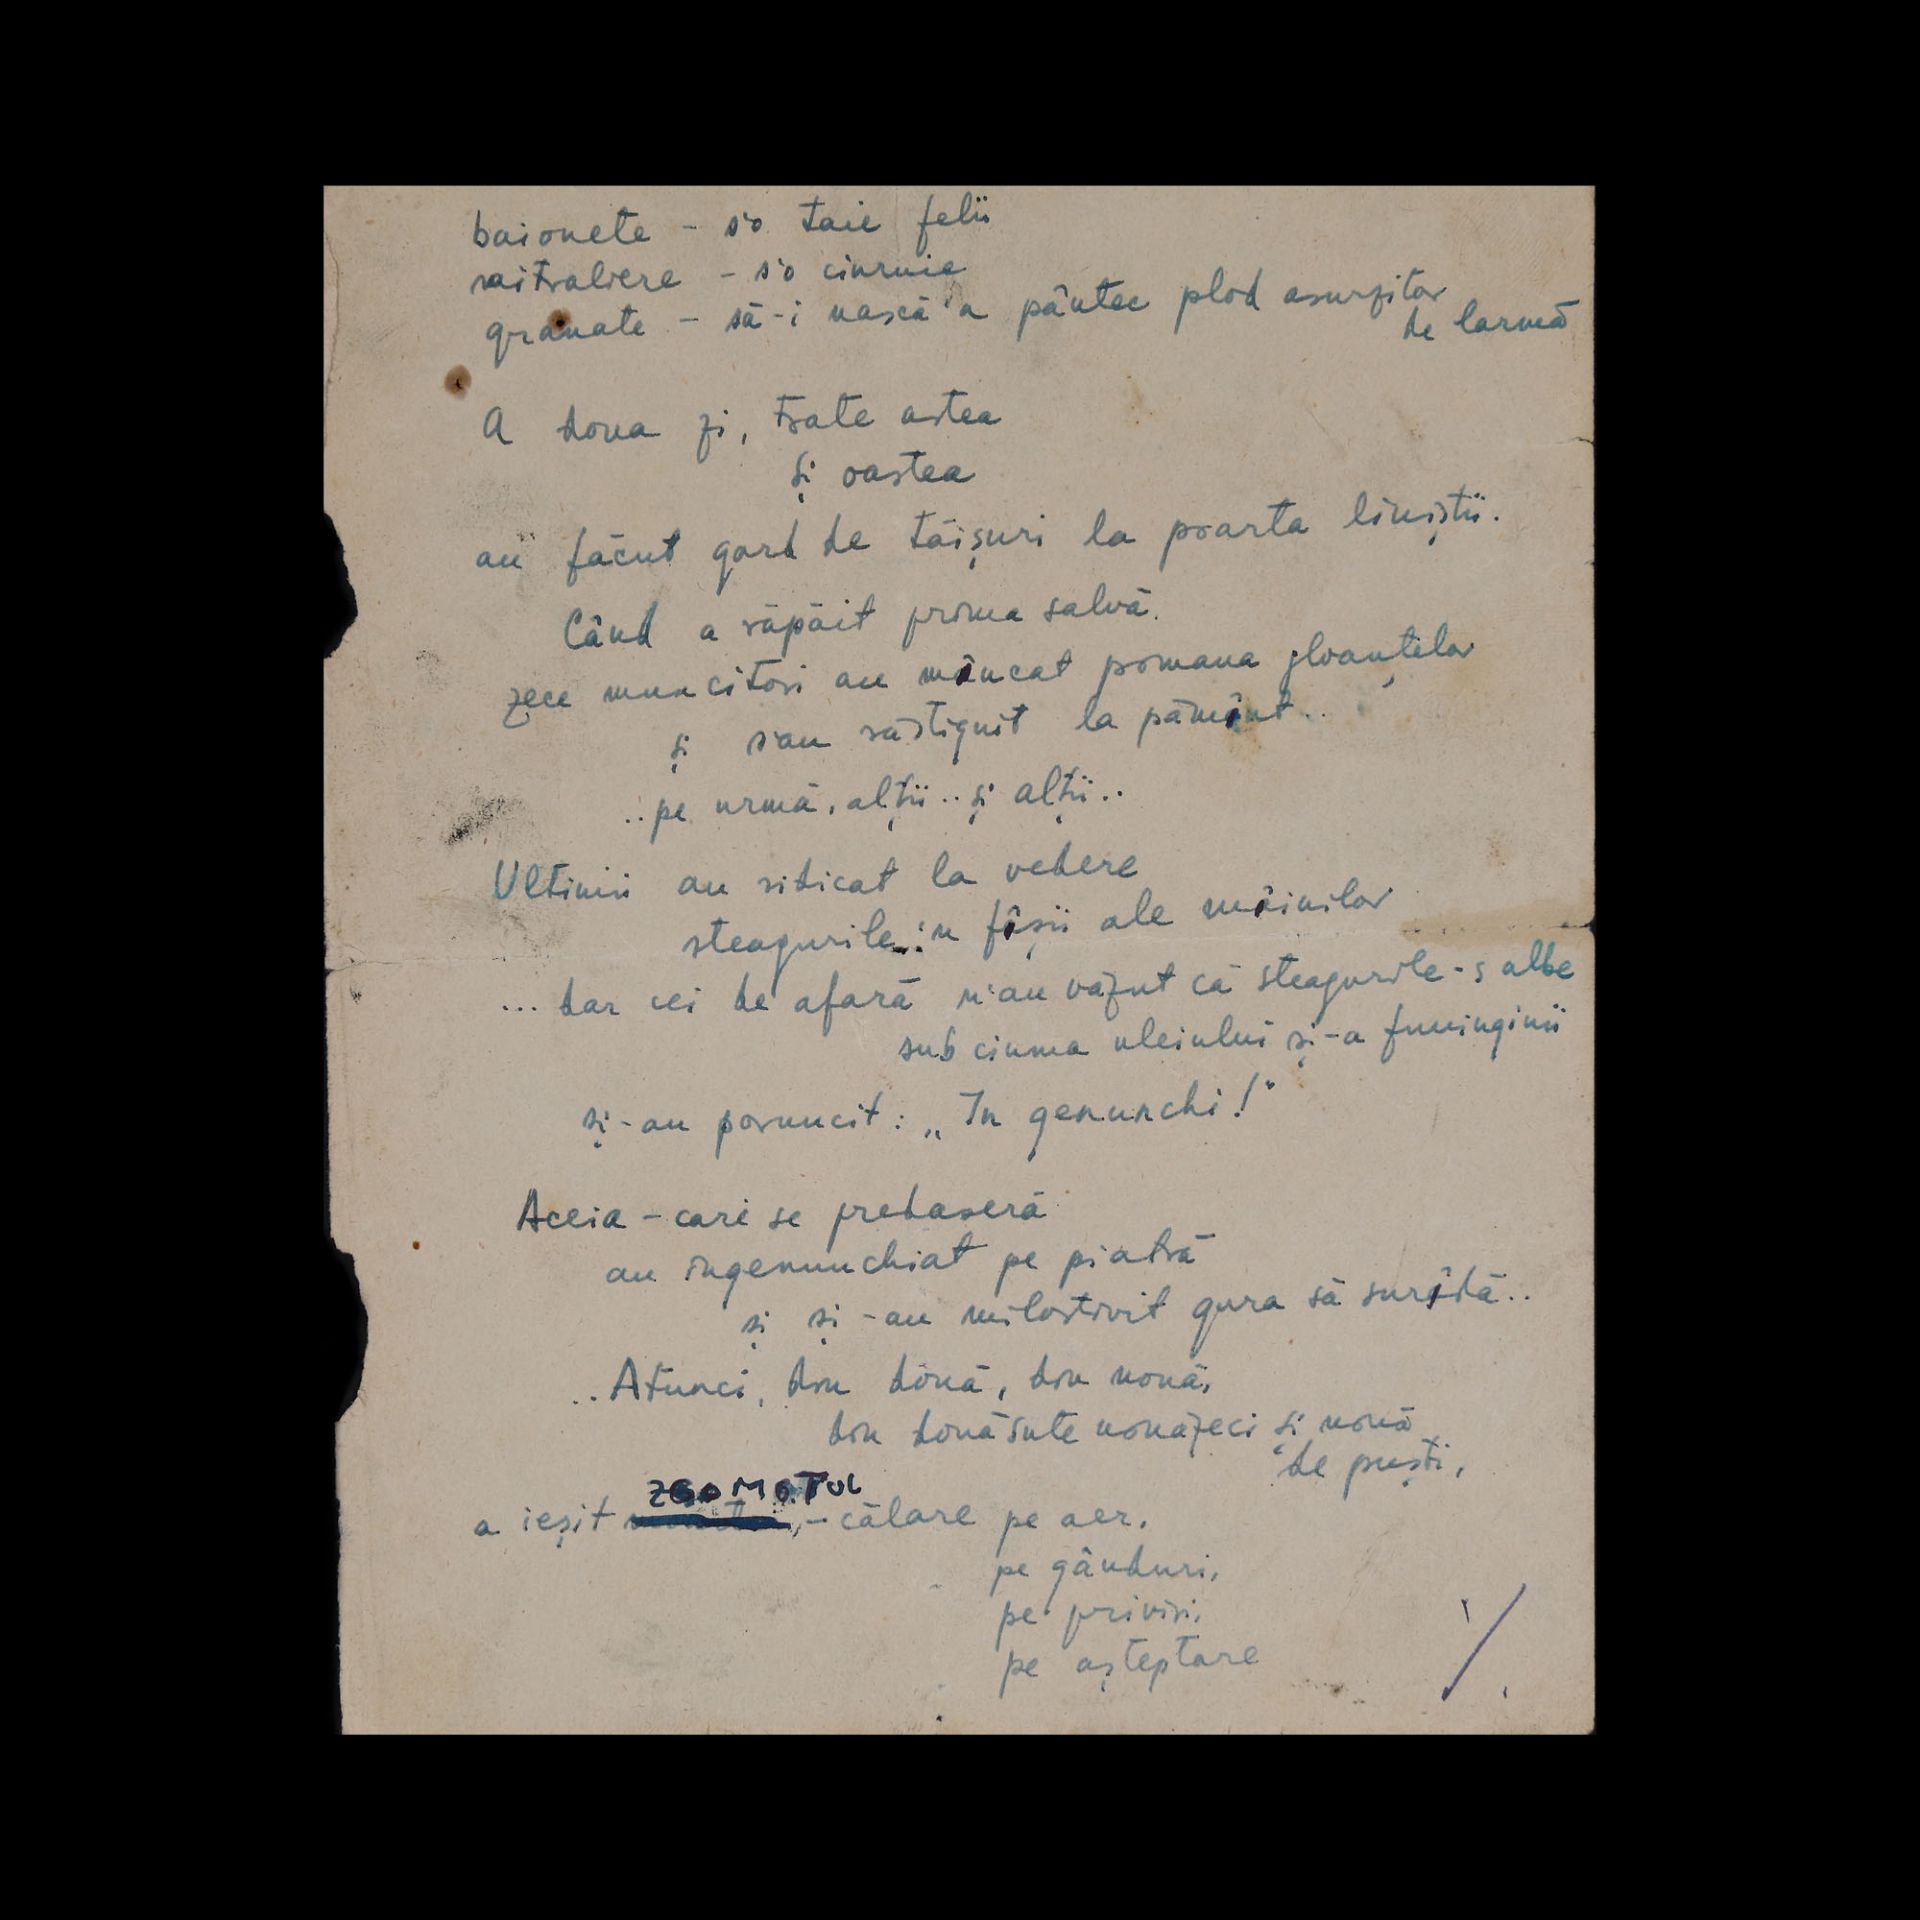 Manuscript of the poem "Grev?", by Nina Cassian, published in Orizont magazine, approx. 1944, from t